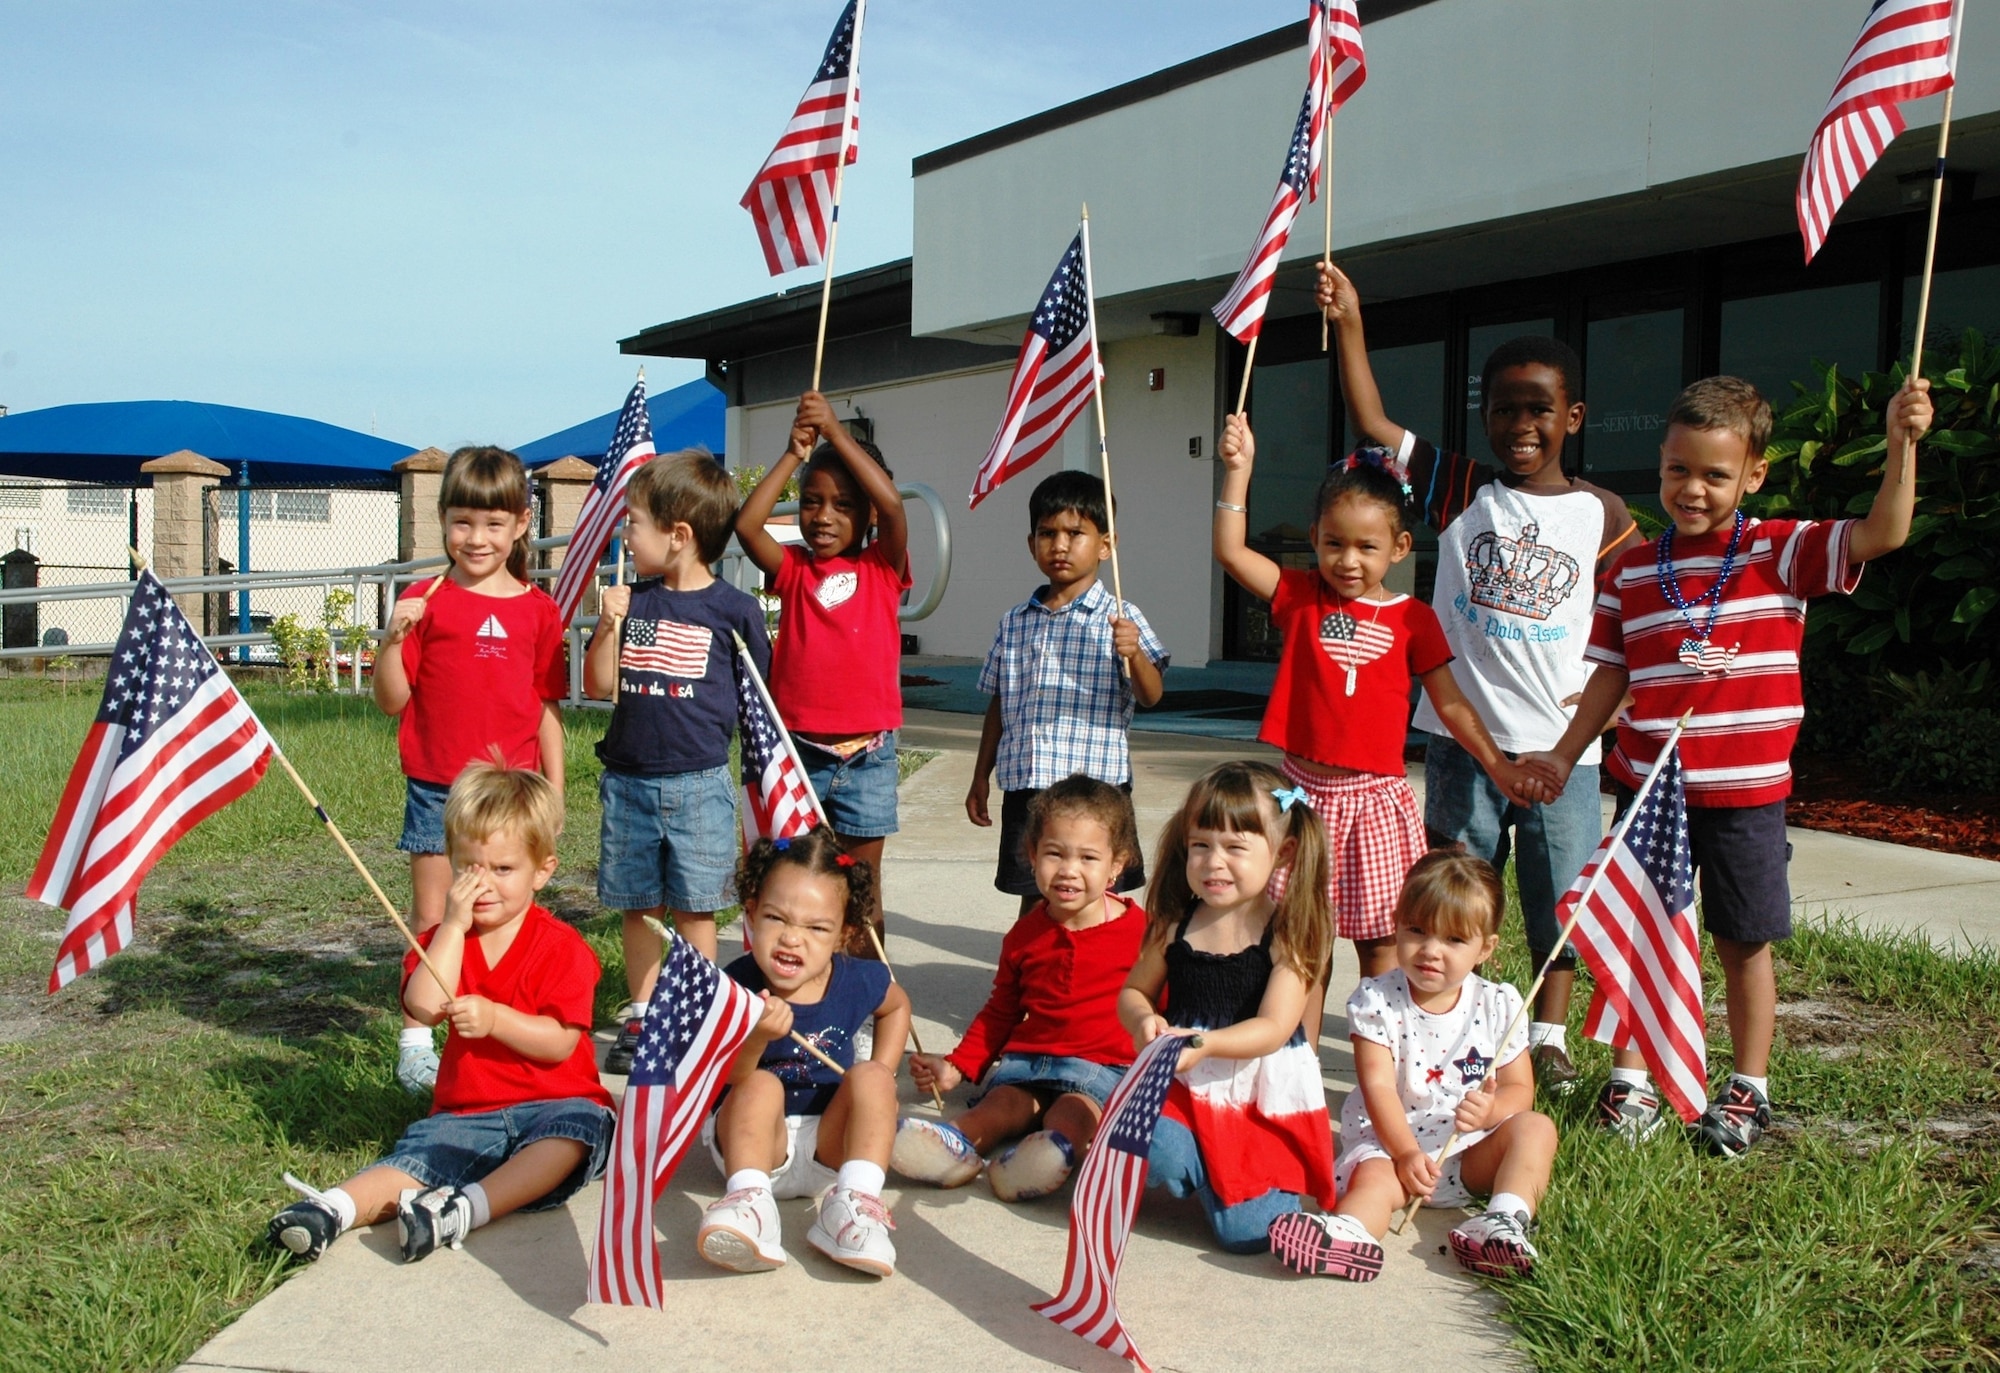 There was plenty of flag-waving at the Child Development Center Wednesday morning as the kids get ready to celebrate the July 4th weekend with their parents. (U.S. Air Force photo by Chris Calkins)